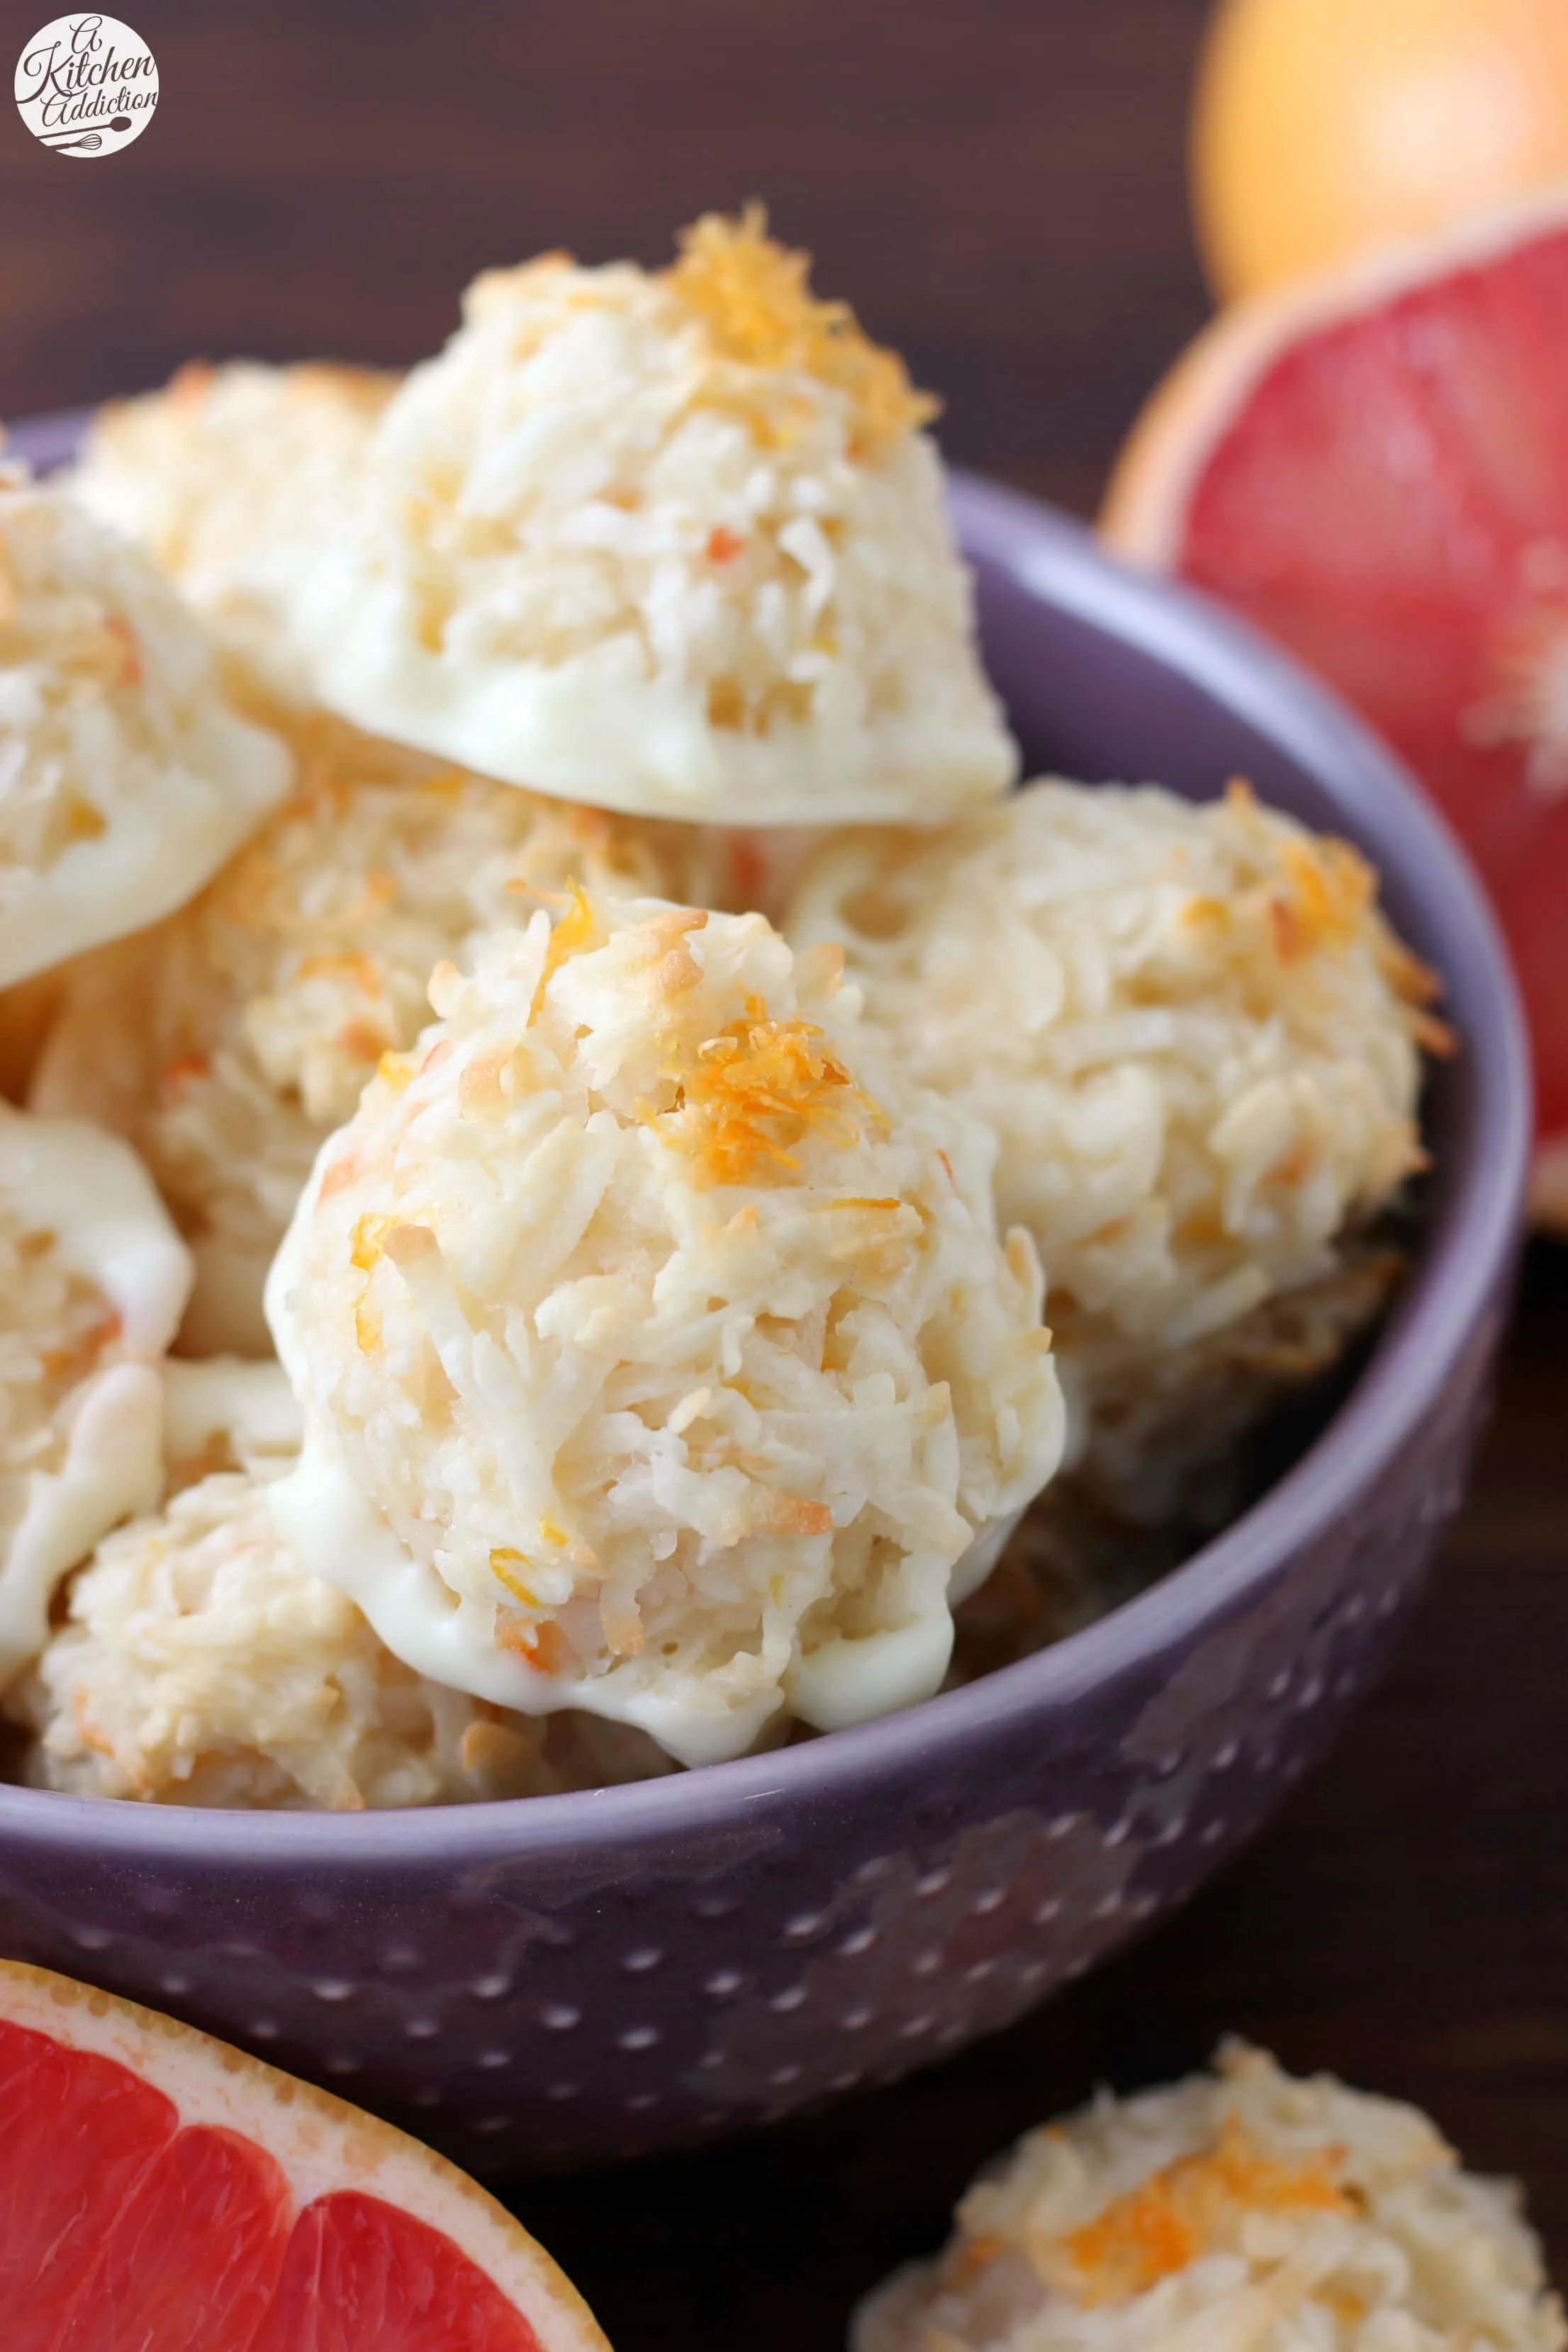 Coconut Grapefruit Macaroons dipped in White Chocolate